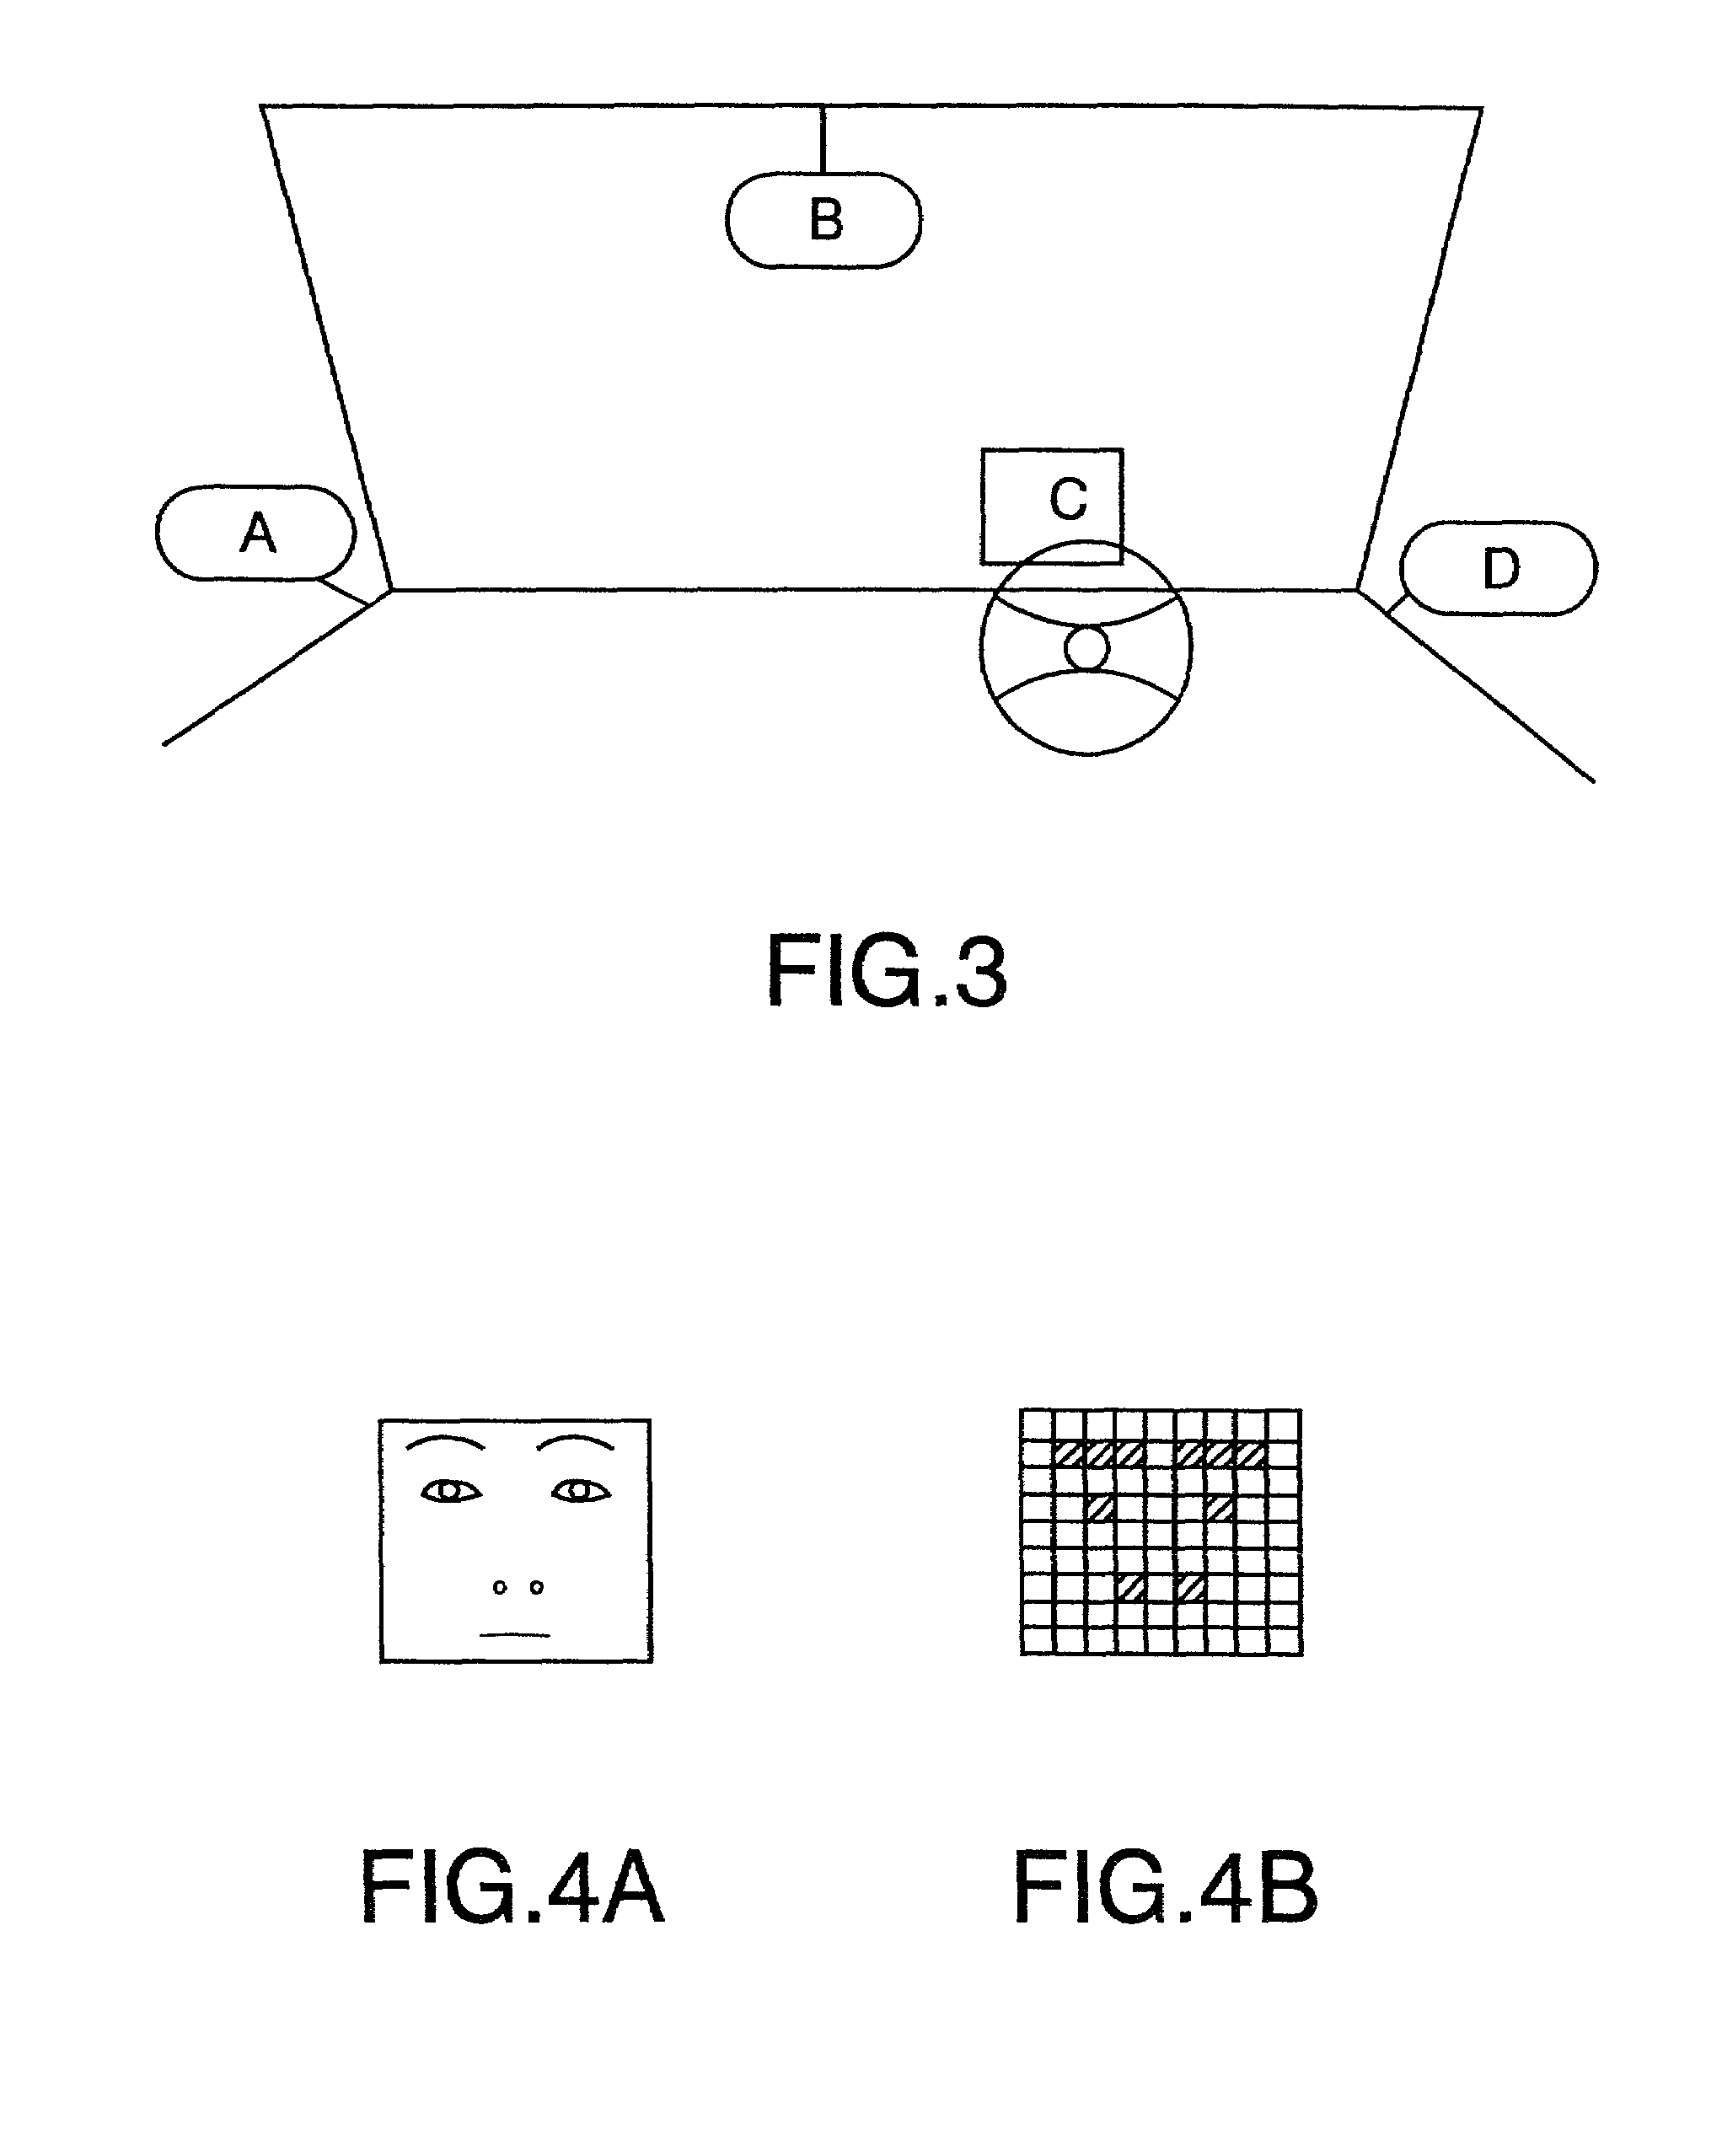 Image processing system and driving support system